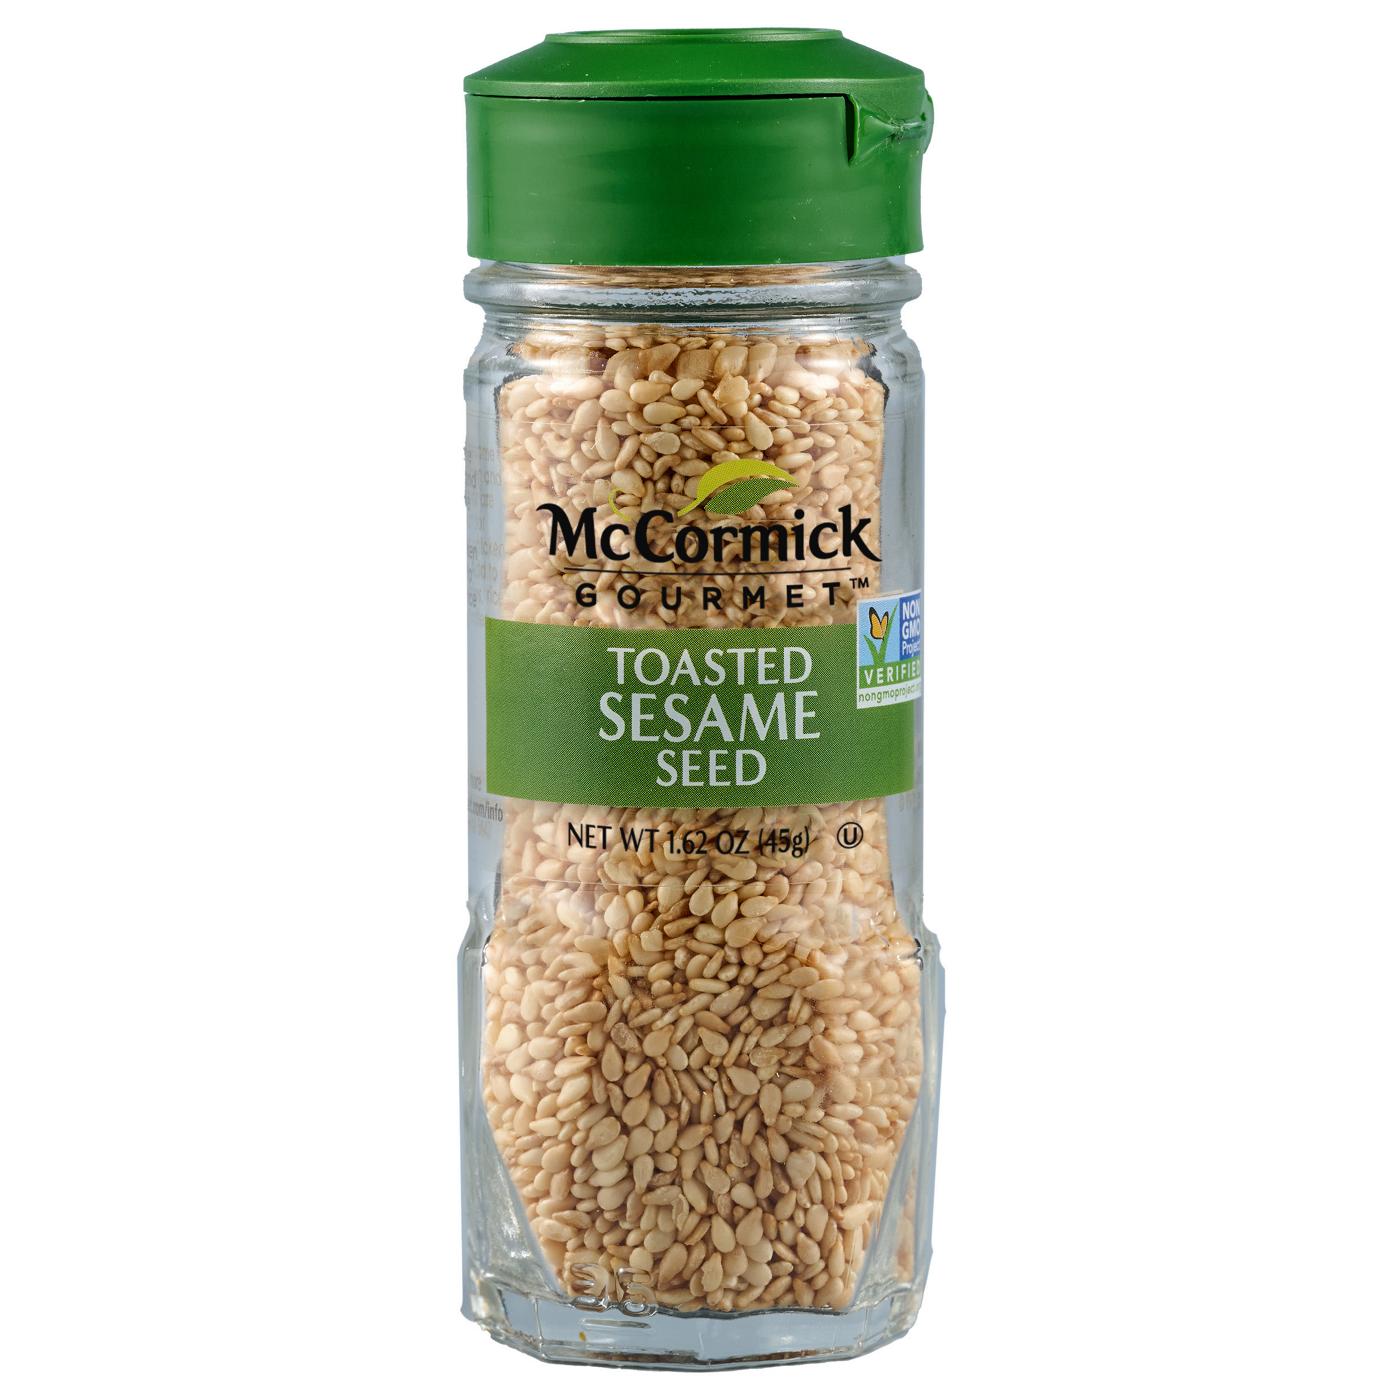 McCormick Gourmet Toasted Sesame Seed; image 1 of 7